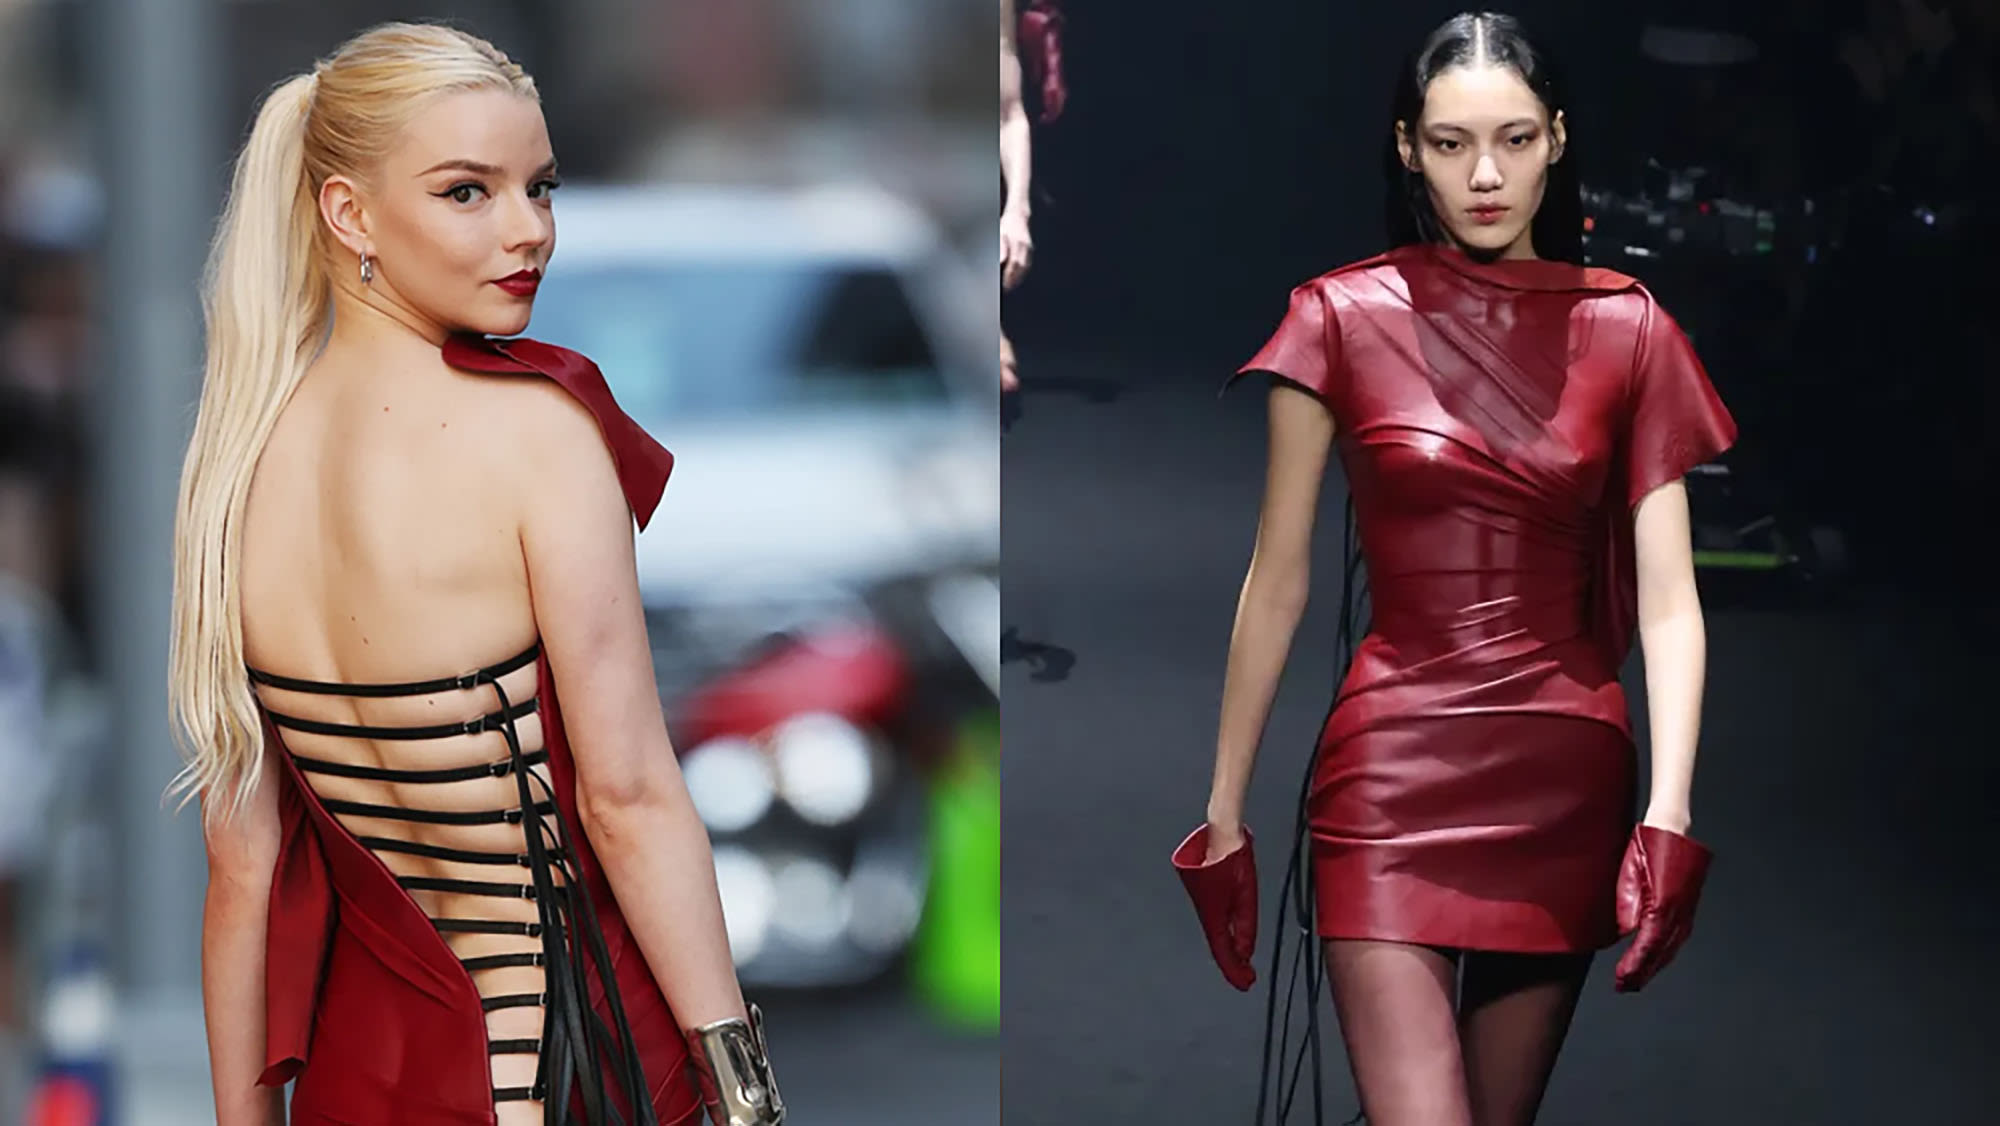 ...Inspiration in Fierce Red Mugler Minidress for ‘Late Show With Stephen Colbert’ Appearance, Talks ‘Furiosa: A Mad Max...